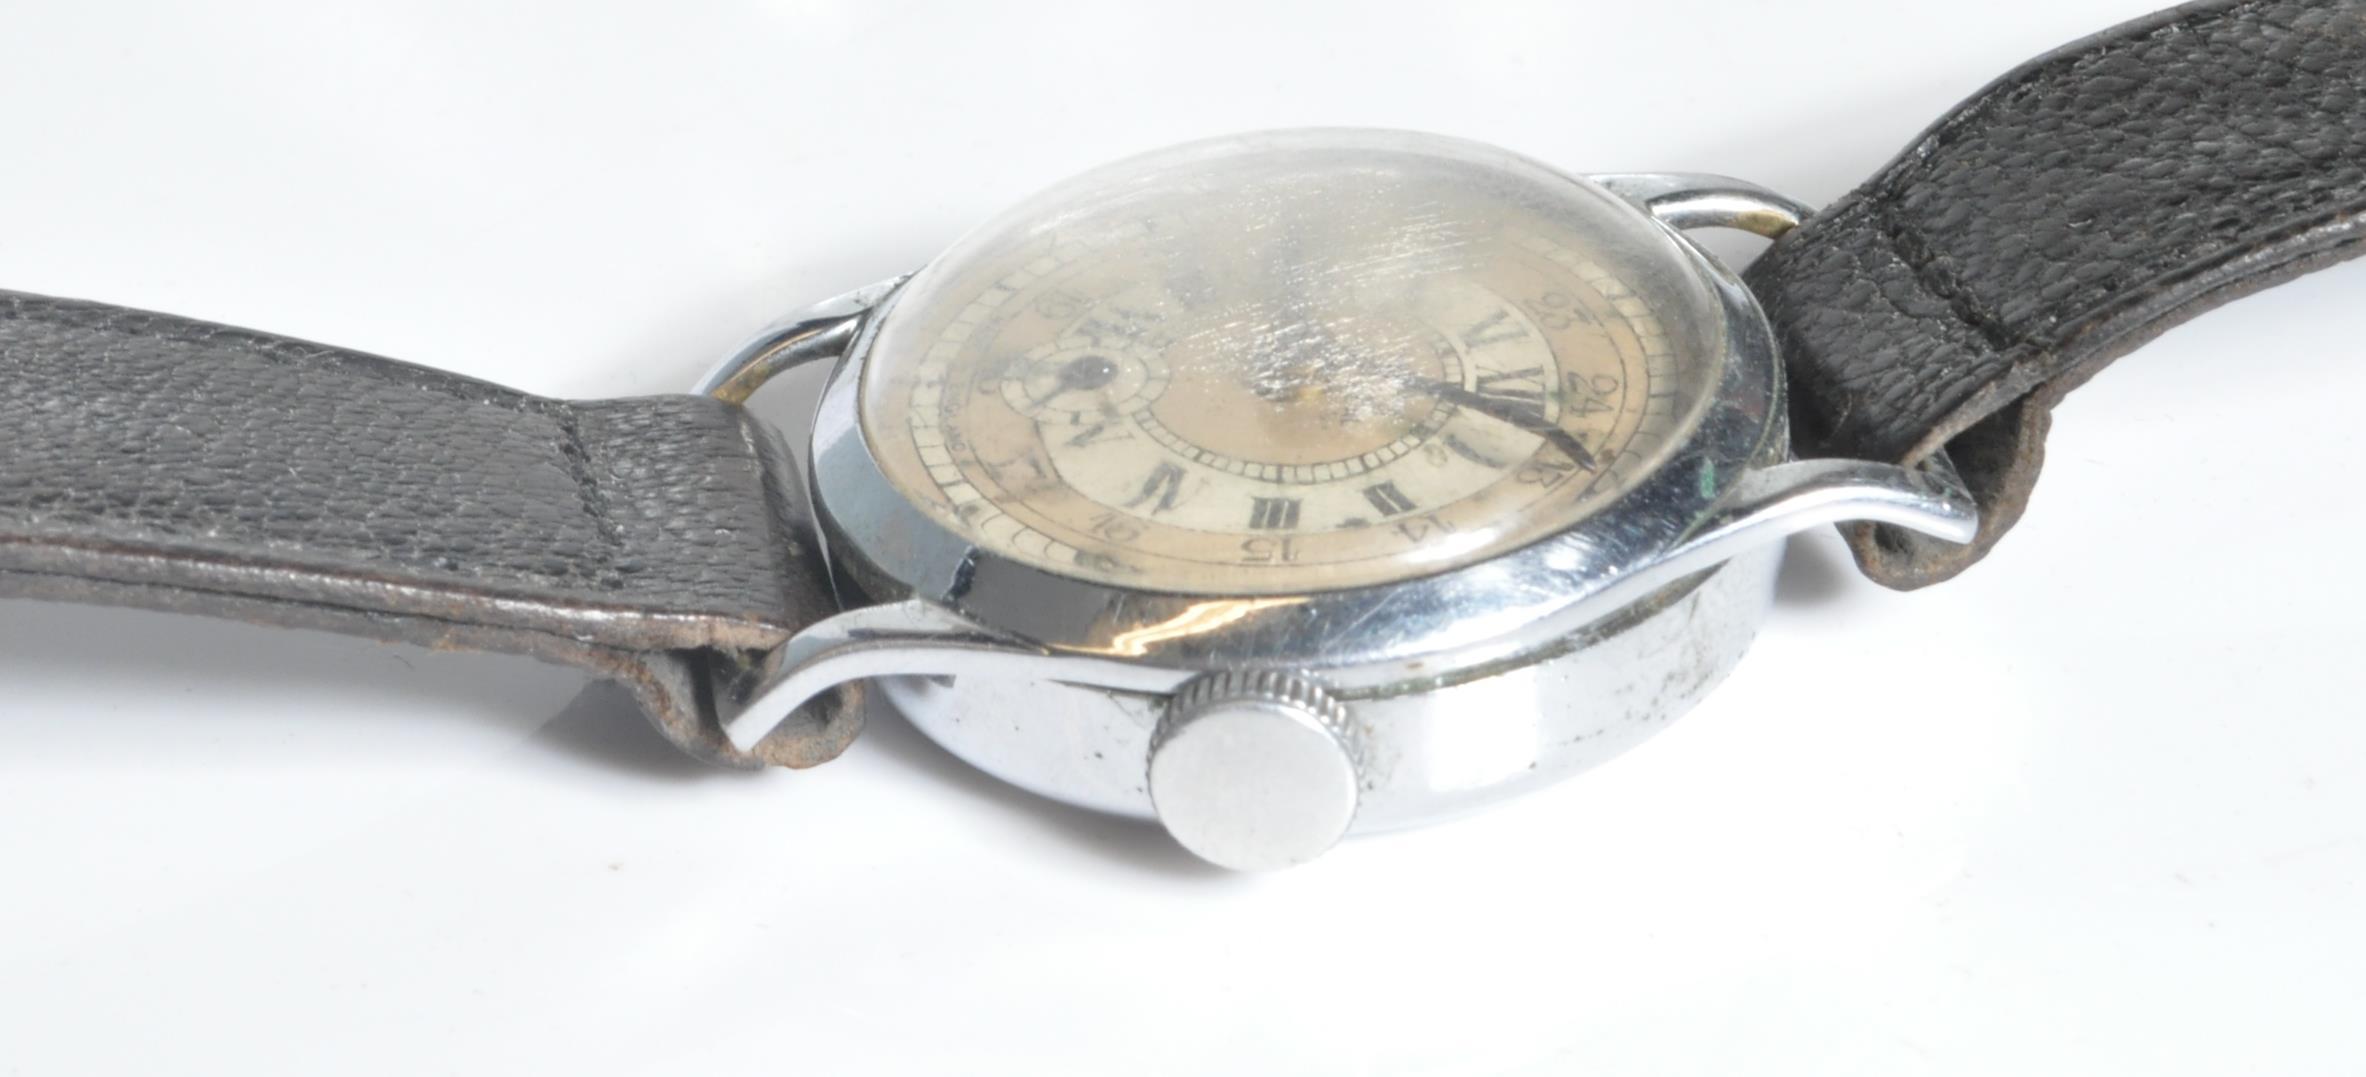 MID 20TH CENTURY SERVICES COLONIAL GENTLEMEN'S WRISTWATCH - Image 3 of 11